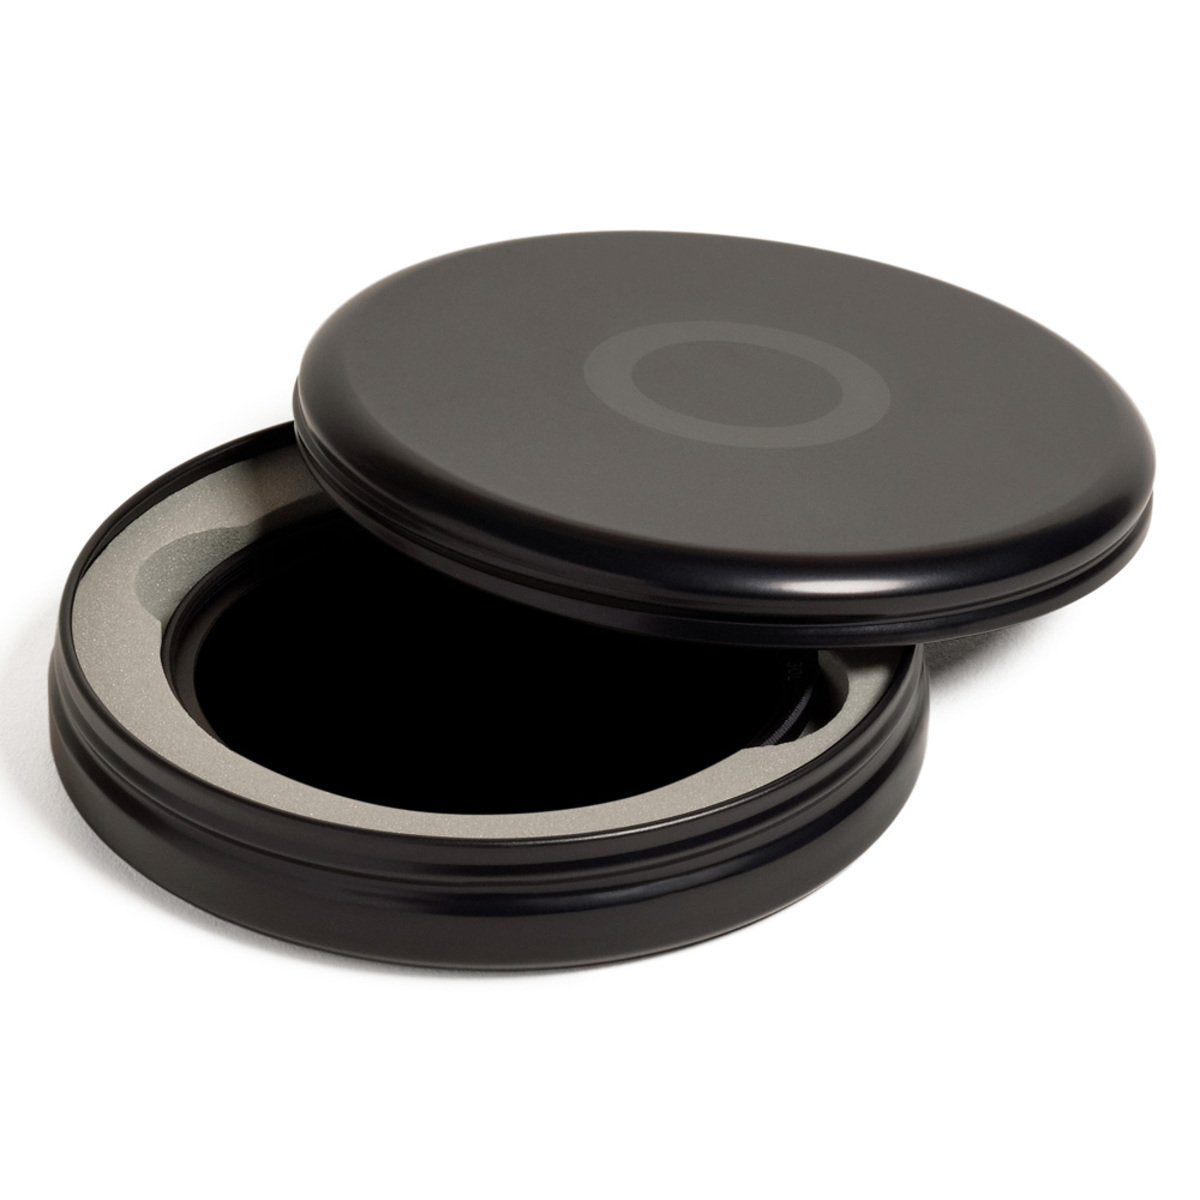 Urth 40.5mm ND8-128 (3-7 Stop) Variable ND Lens Filter (Plus+)